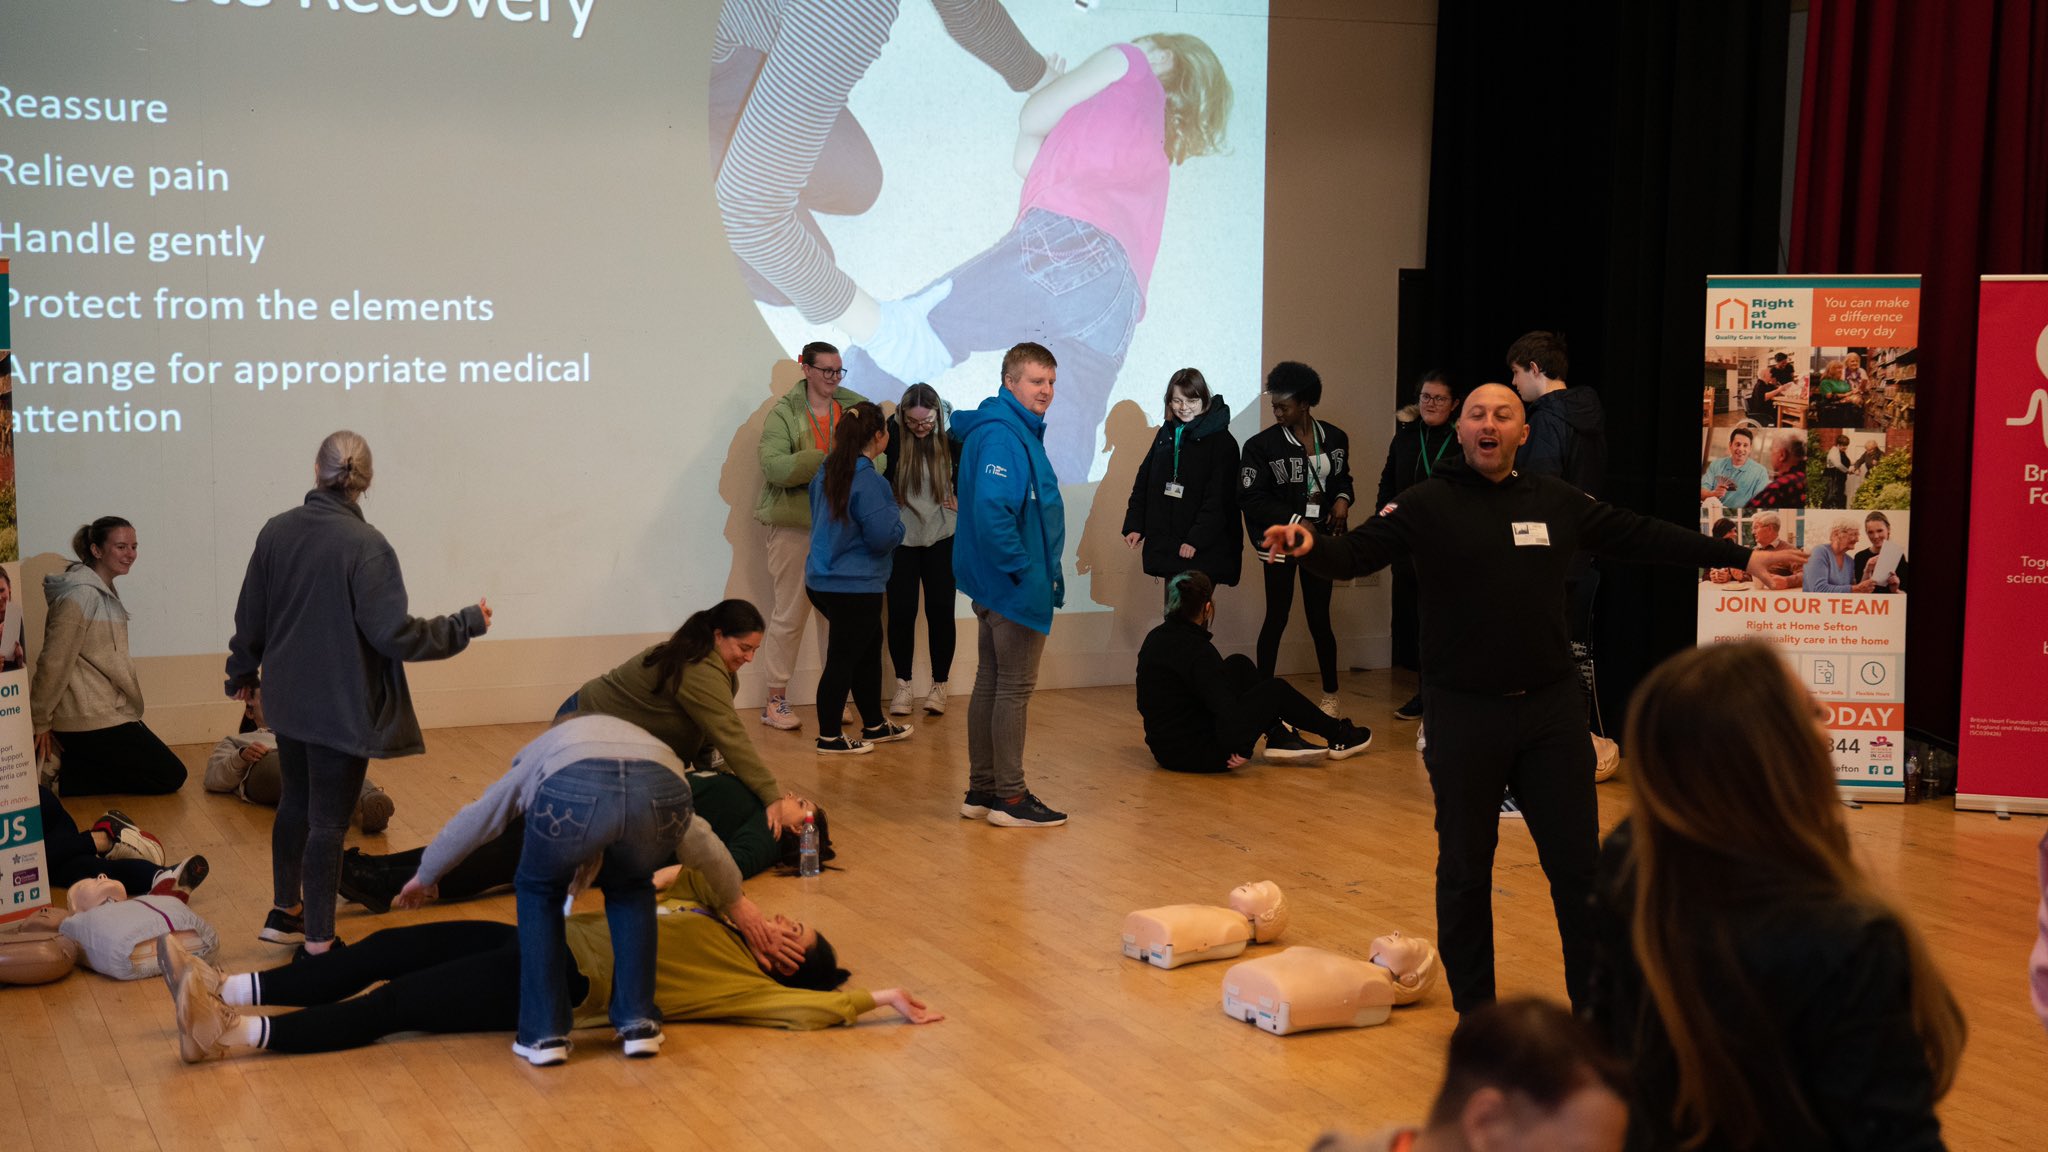 Southport College hosted its largest ever CPR life-saving training event